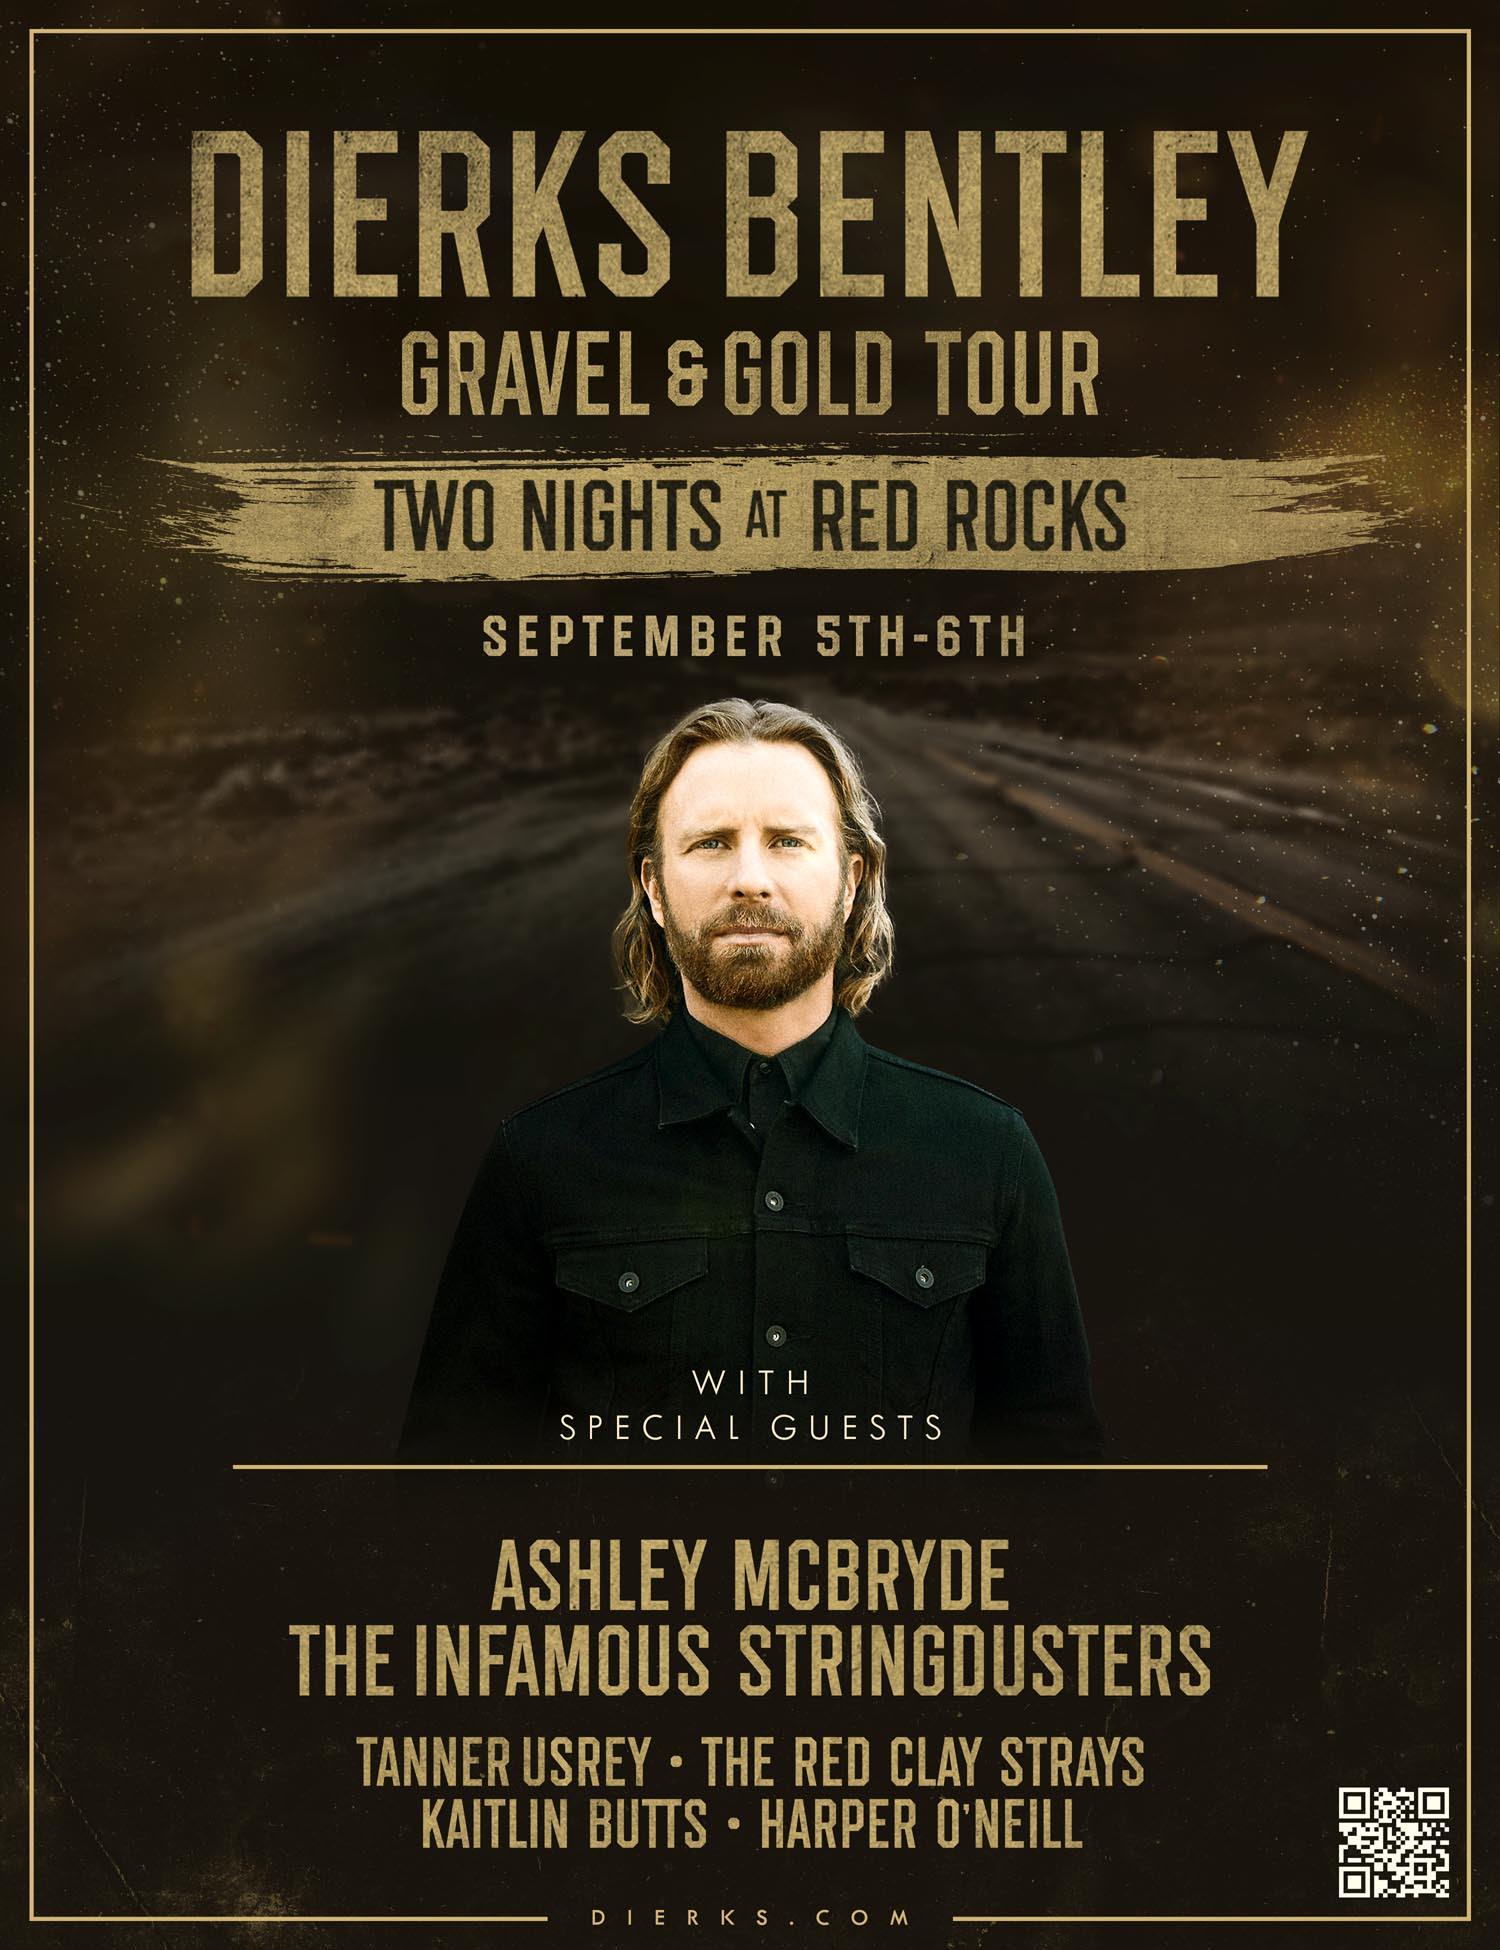 DIERKS BENTLEY ANNOUNCES TWO NIGHTS AT RED ROCKS AMPHITHEATRE SEPTEMBER 5 AND 6